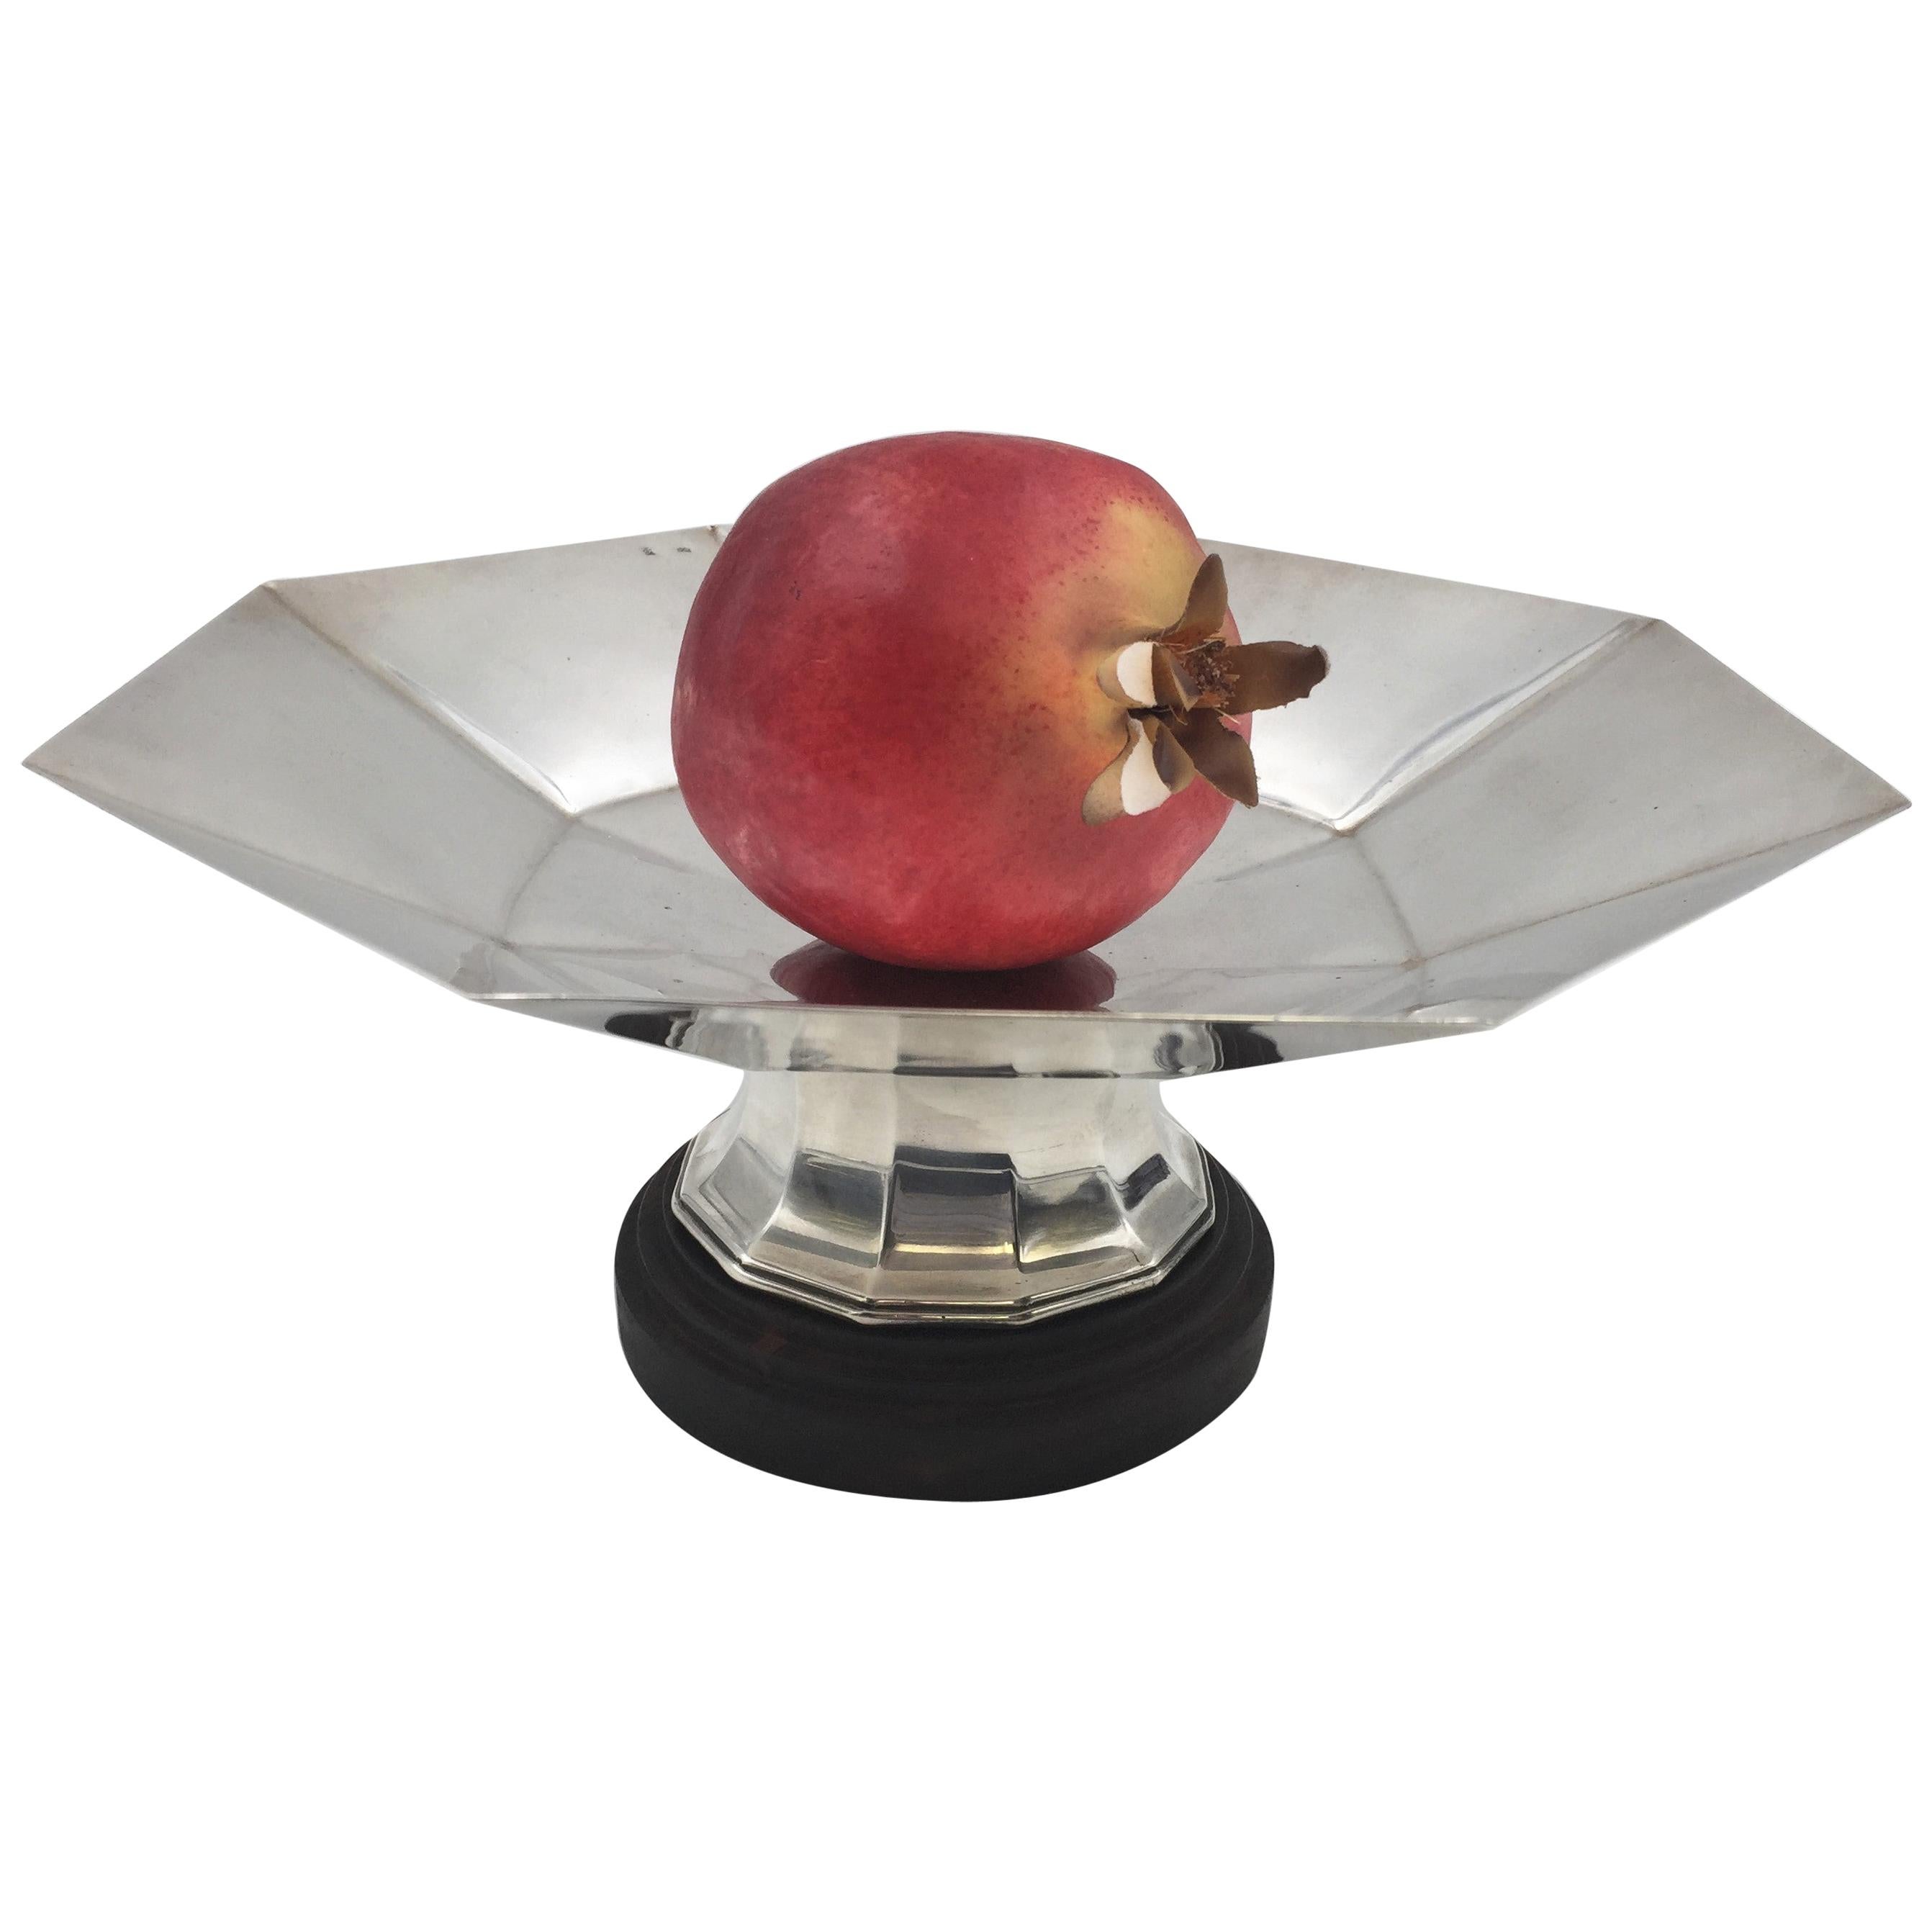 Continental Silver and Wood Centerpiece Stand Bowl in Mid-Century Modern Style